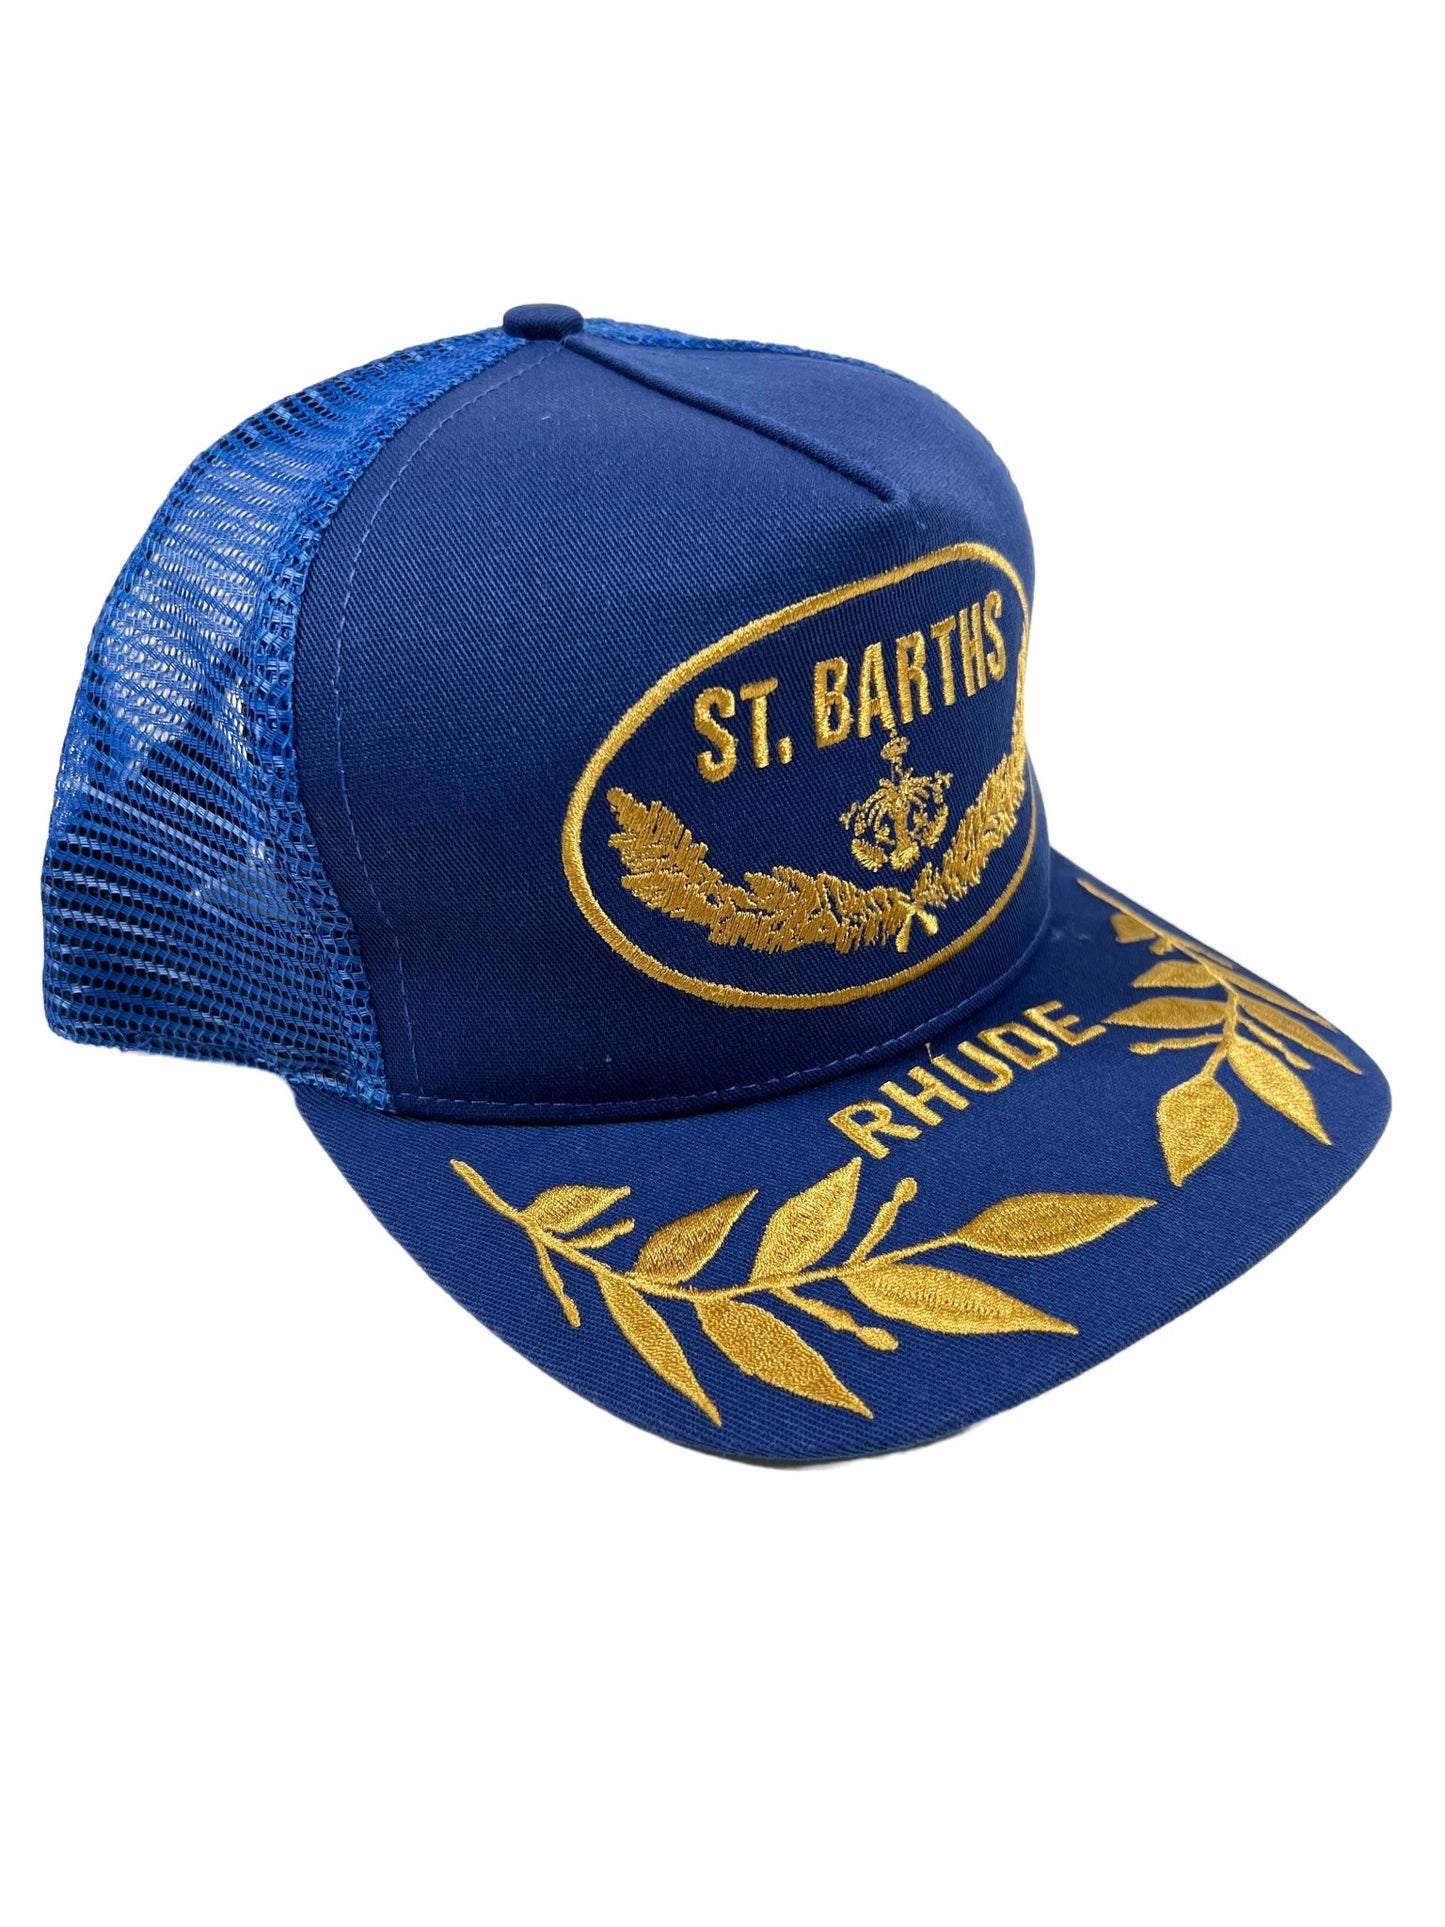 St Patrick's embroidered trucker hat in blue and gold by RHUDE DOUBLER HAT COBALT BLUE.